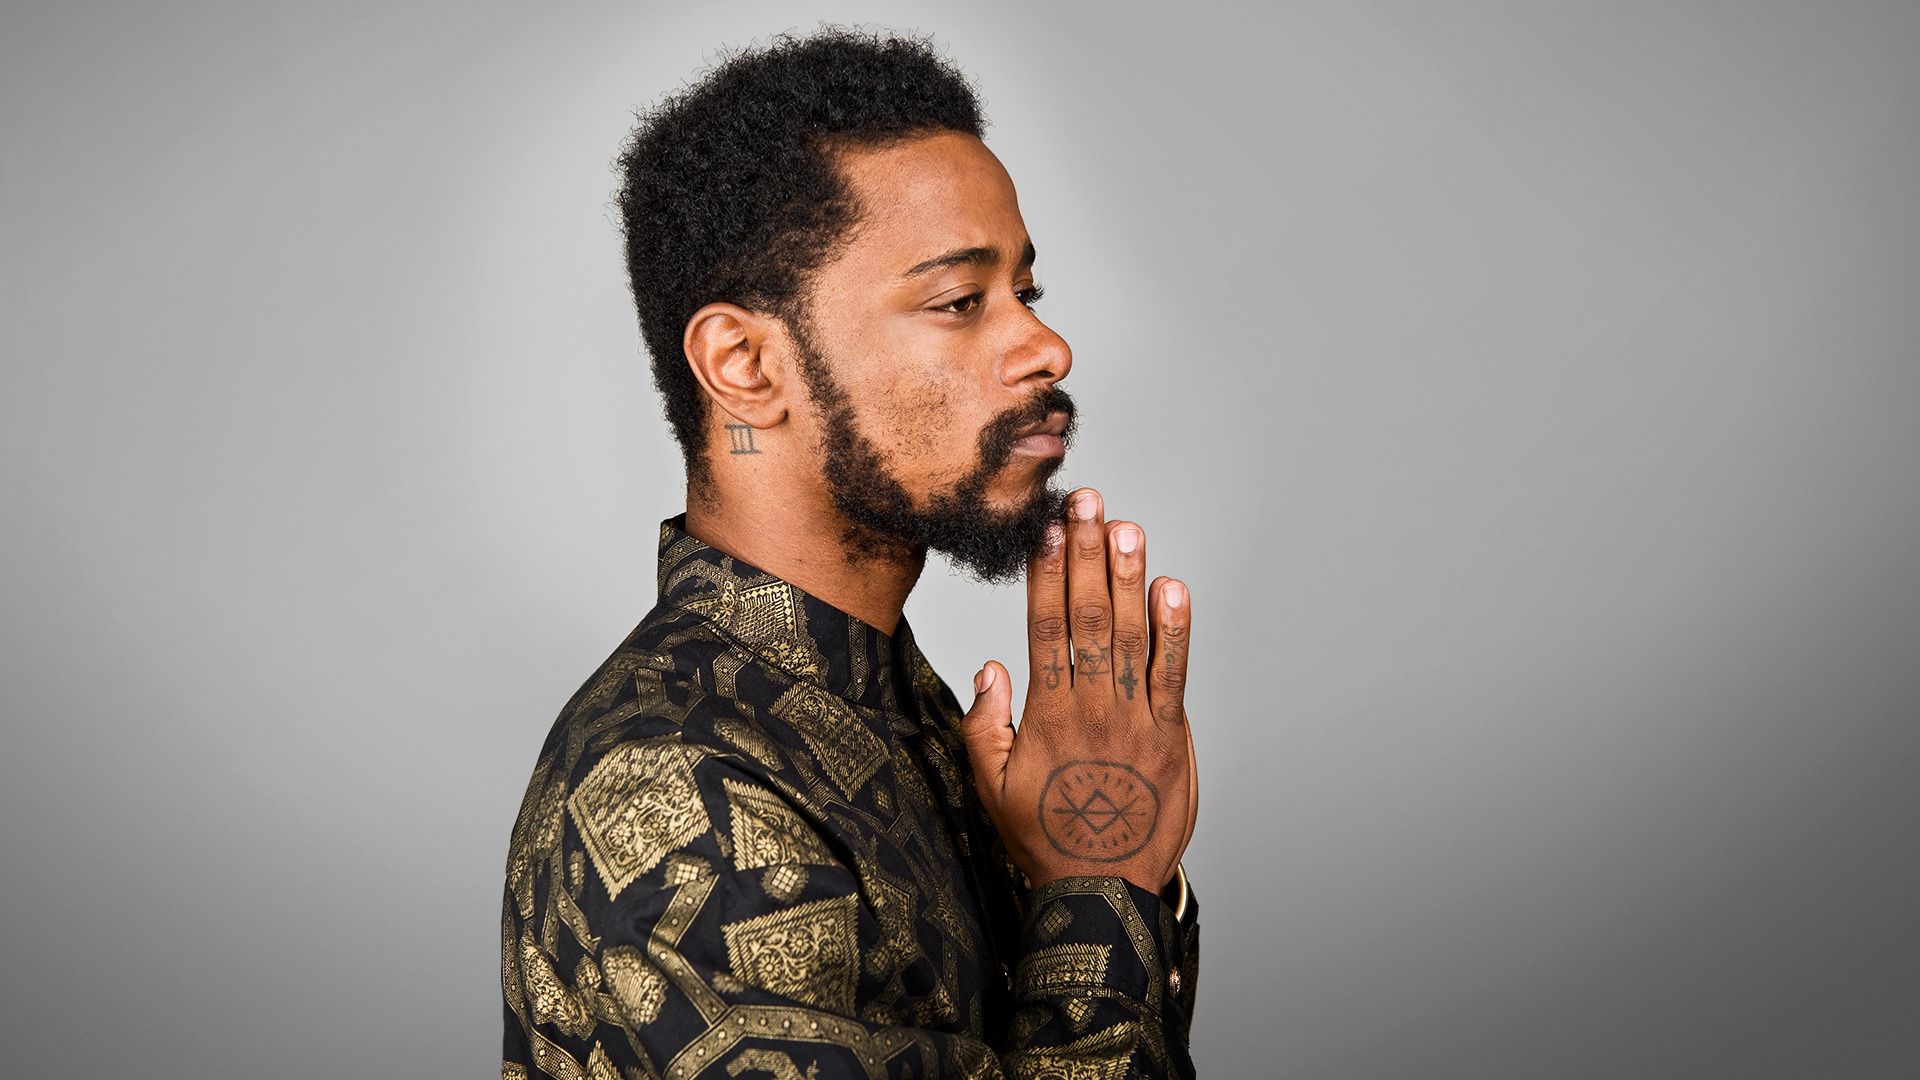 Lakeith Stanfield is the coolest actor in the world.